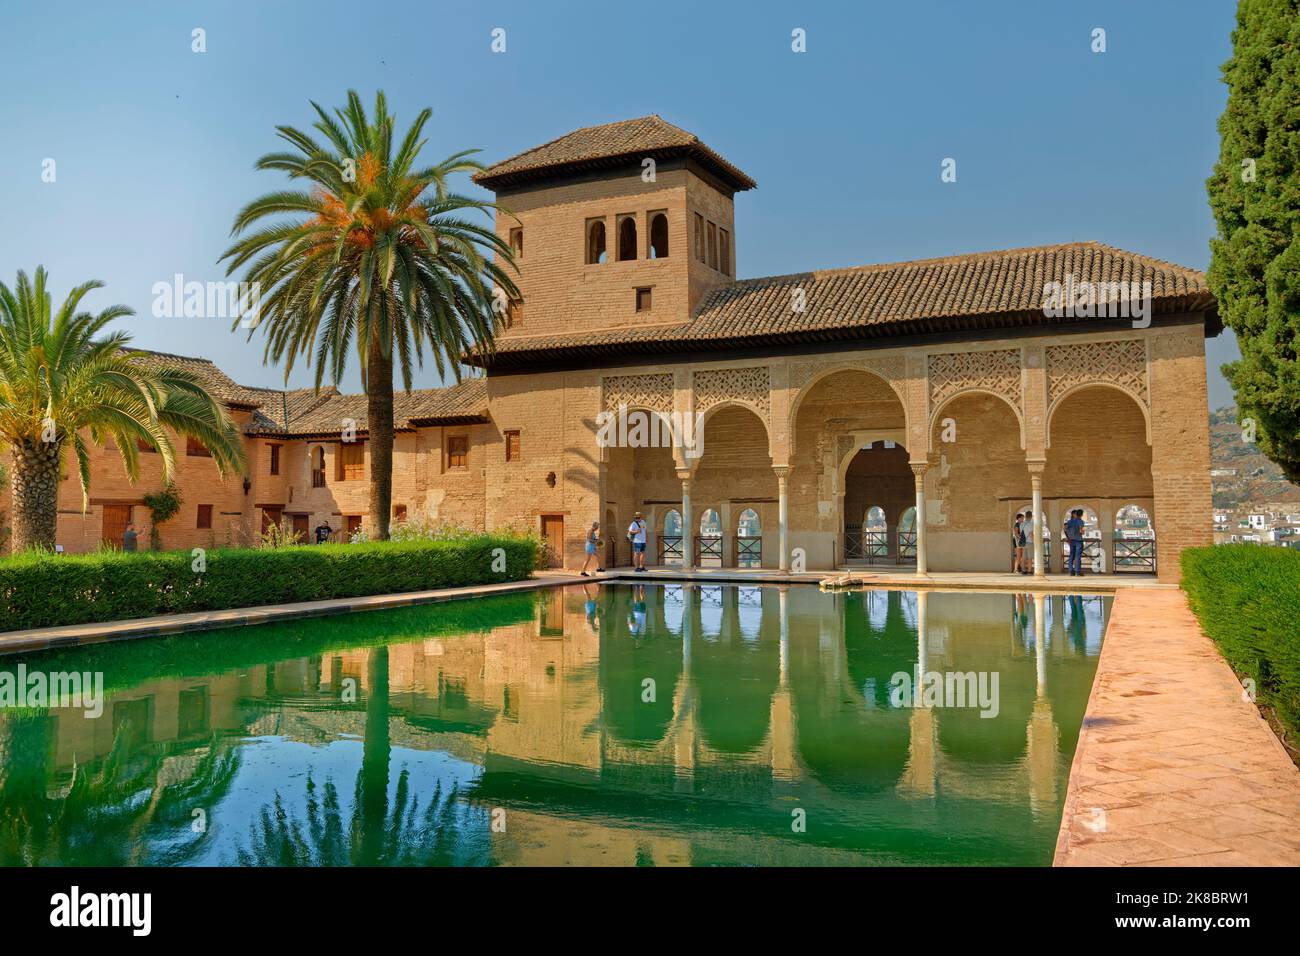 The Palace of El Partal, one of the lesser palaces of the Nasrid Alhambra Palace complex at Granada, Andalucia, Spain. Stock Photo